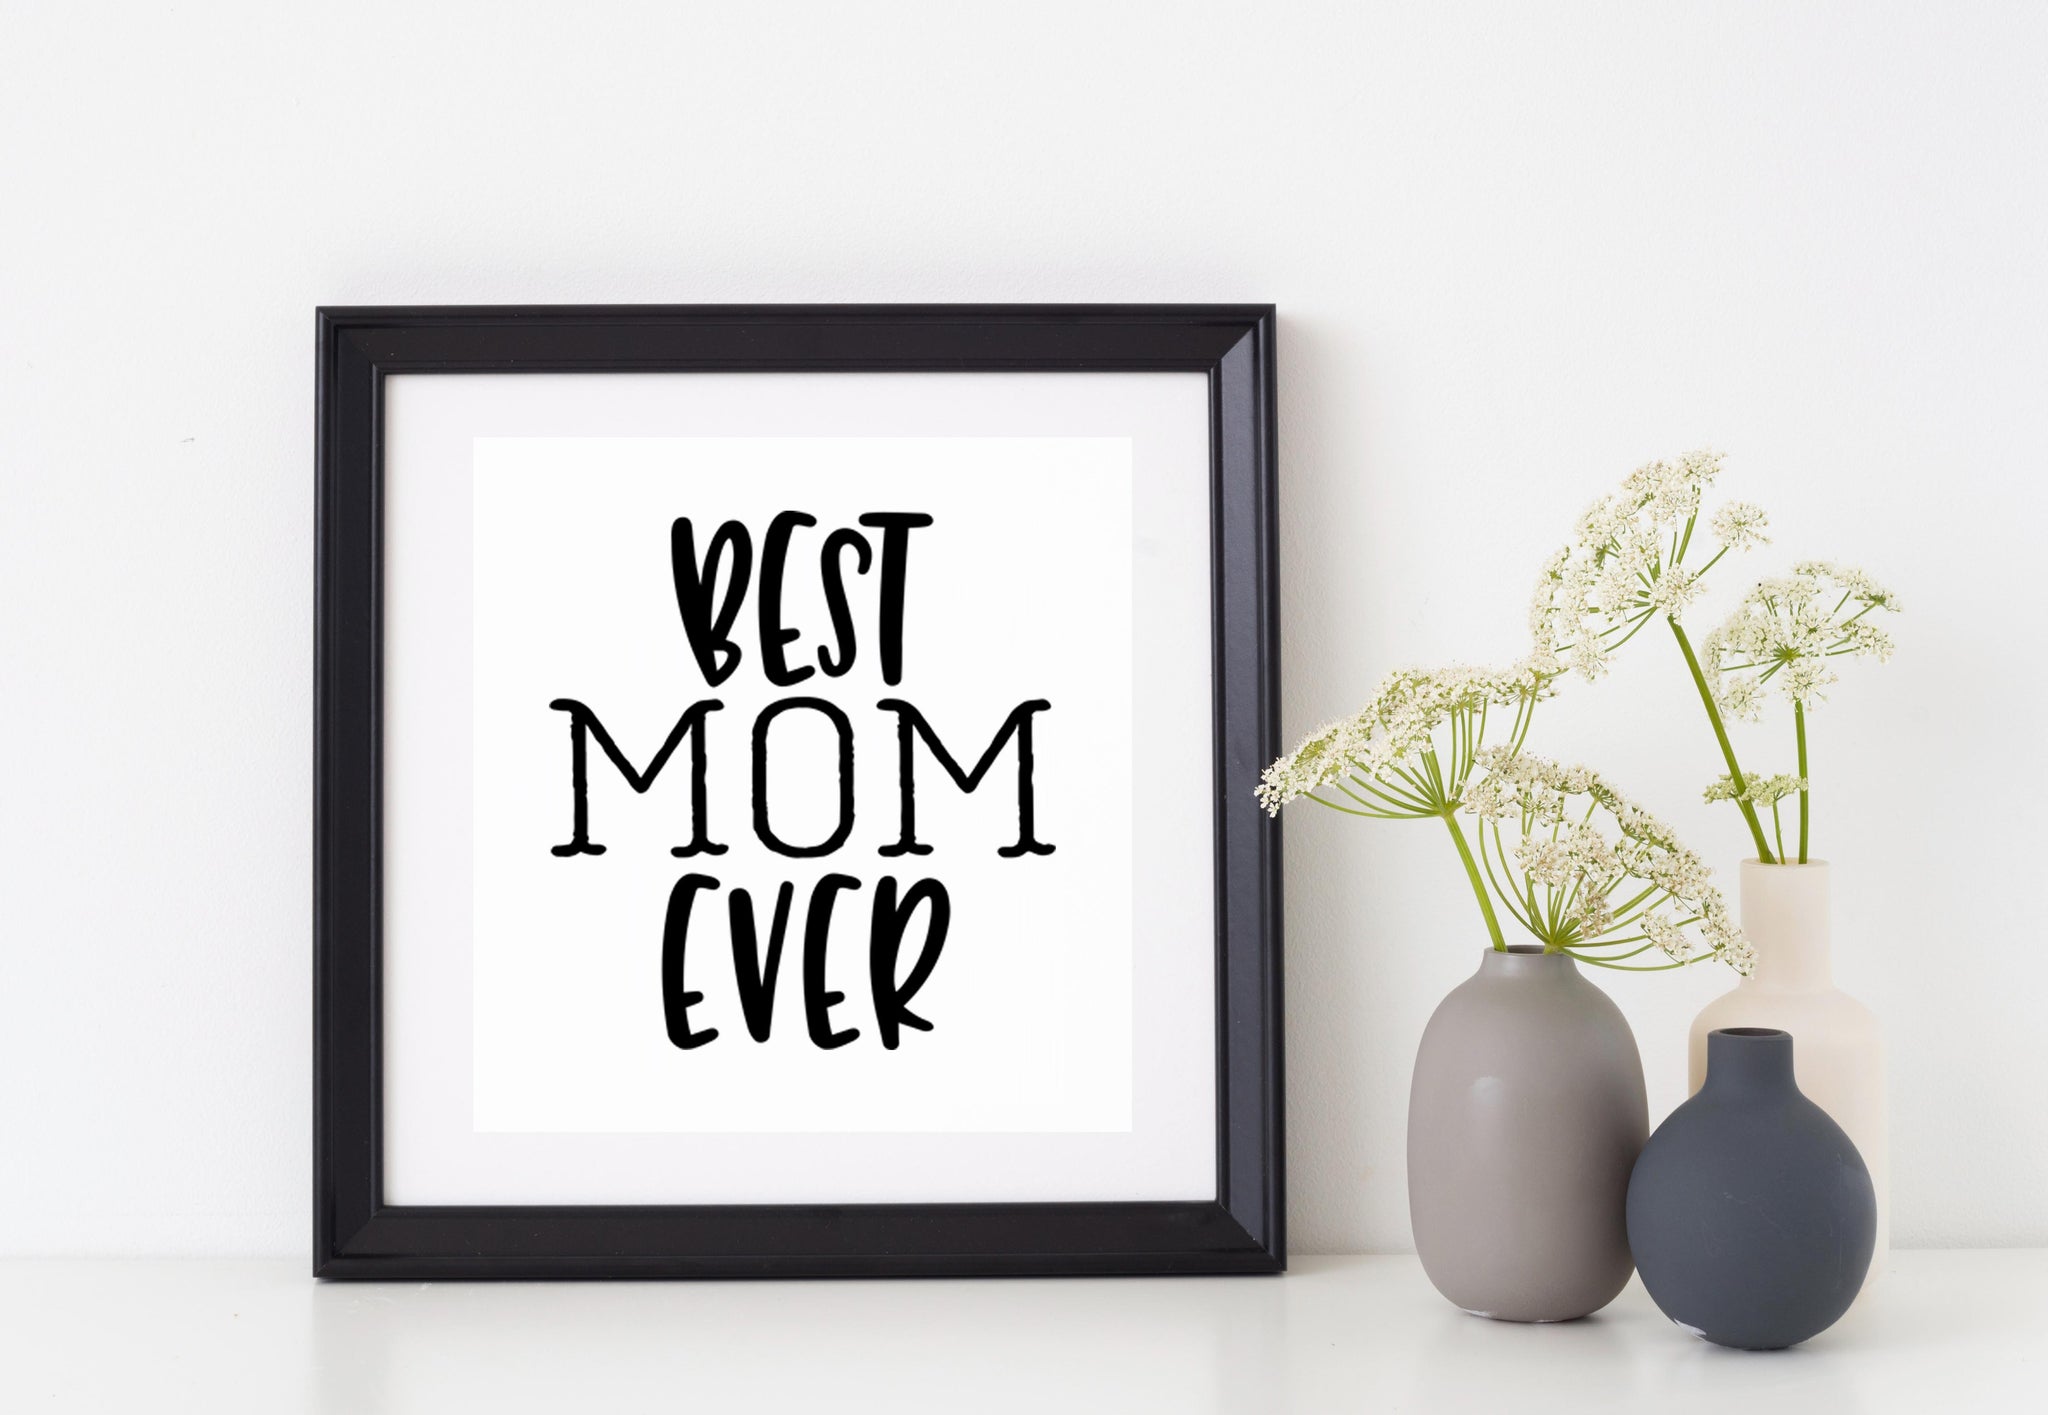 Best Mom Ever – Continue Good